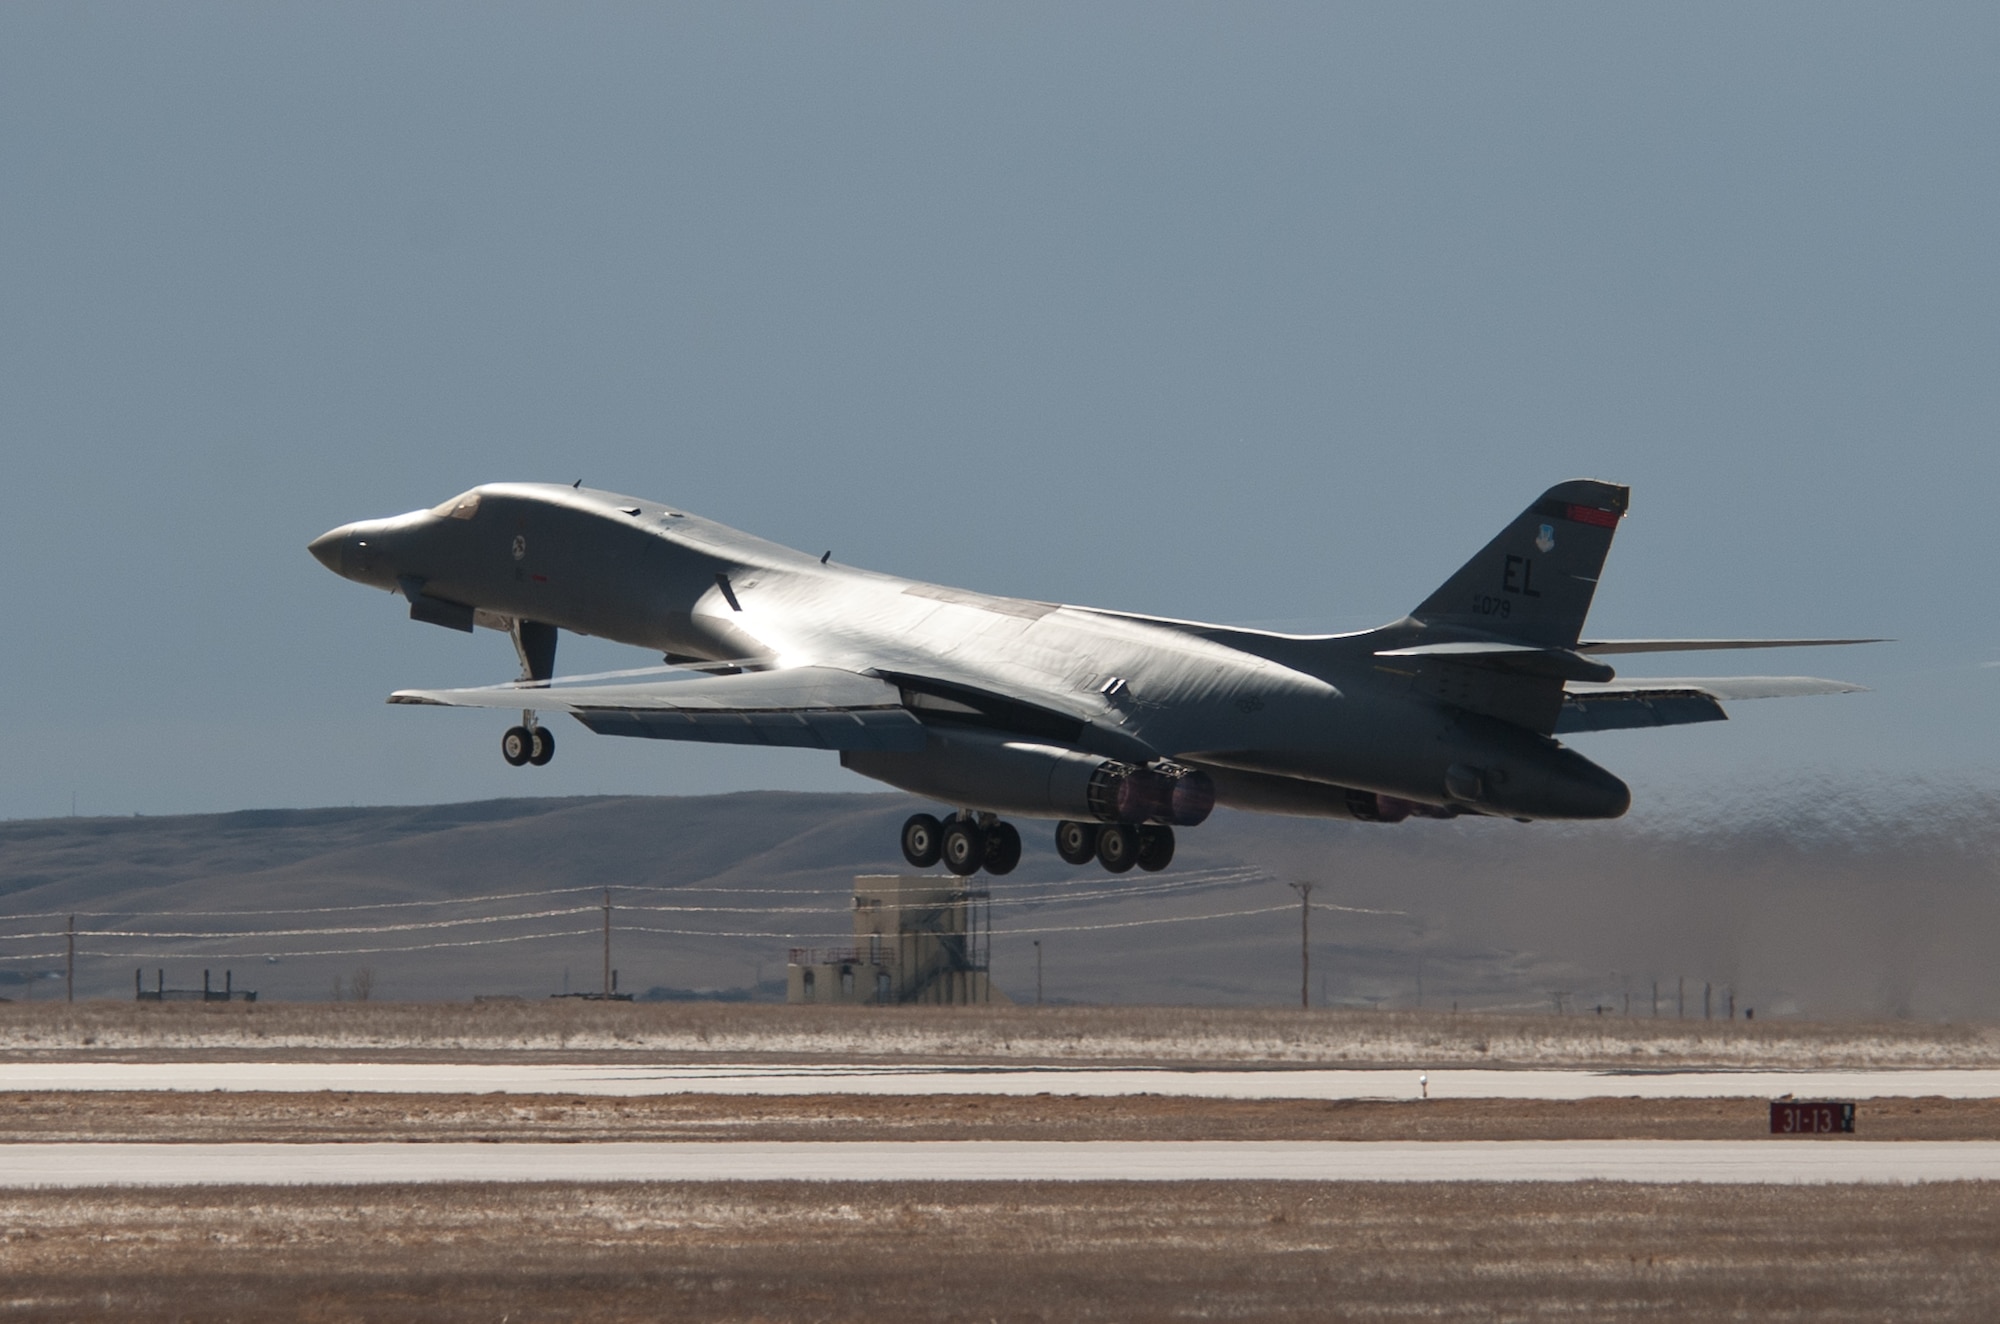 A B-1 bomber loaded with GBU-54 Laser Joint Direct Attack Munitions takes off during the Combat Hammer exercise at Ellsworth Air Force Base, S.D., Feb. 19, 2014. B-1 aircrews from the 34th Bomb Squadron employed GBU-54 LJDAMS against moving targets during the Air Force’s air to ground Weapon System Evaluation Program known as Combat Hammer, Feb. 18 to 20, which allows maintenance, munitions, weapons and aircrew Airmen the opportunity to train with these weapons. (U.S. Air Force photo by Senior Airman Alystria Maurer/Released)